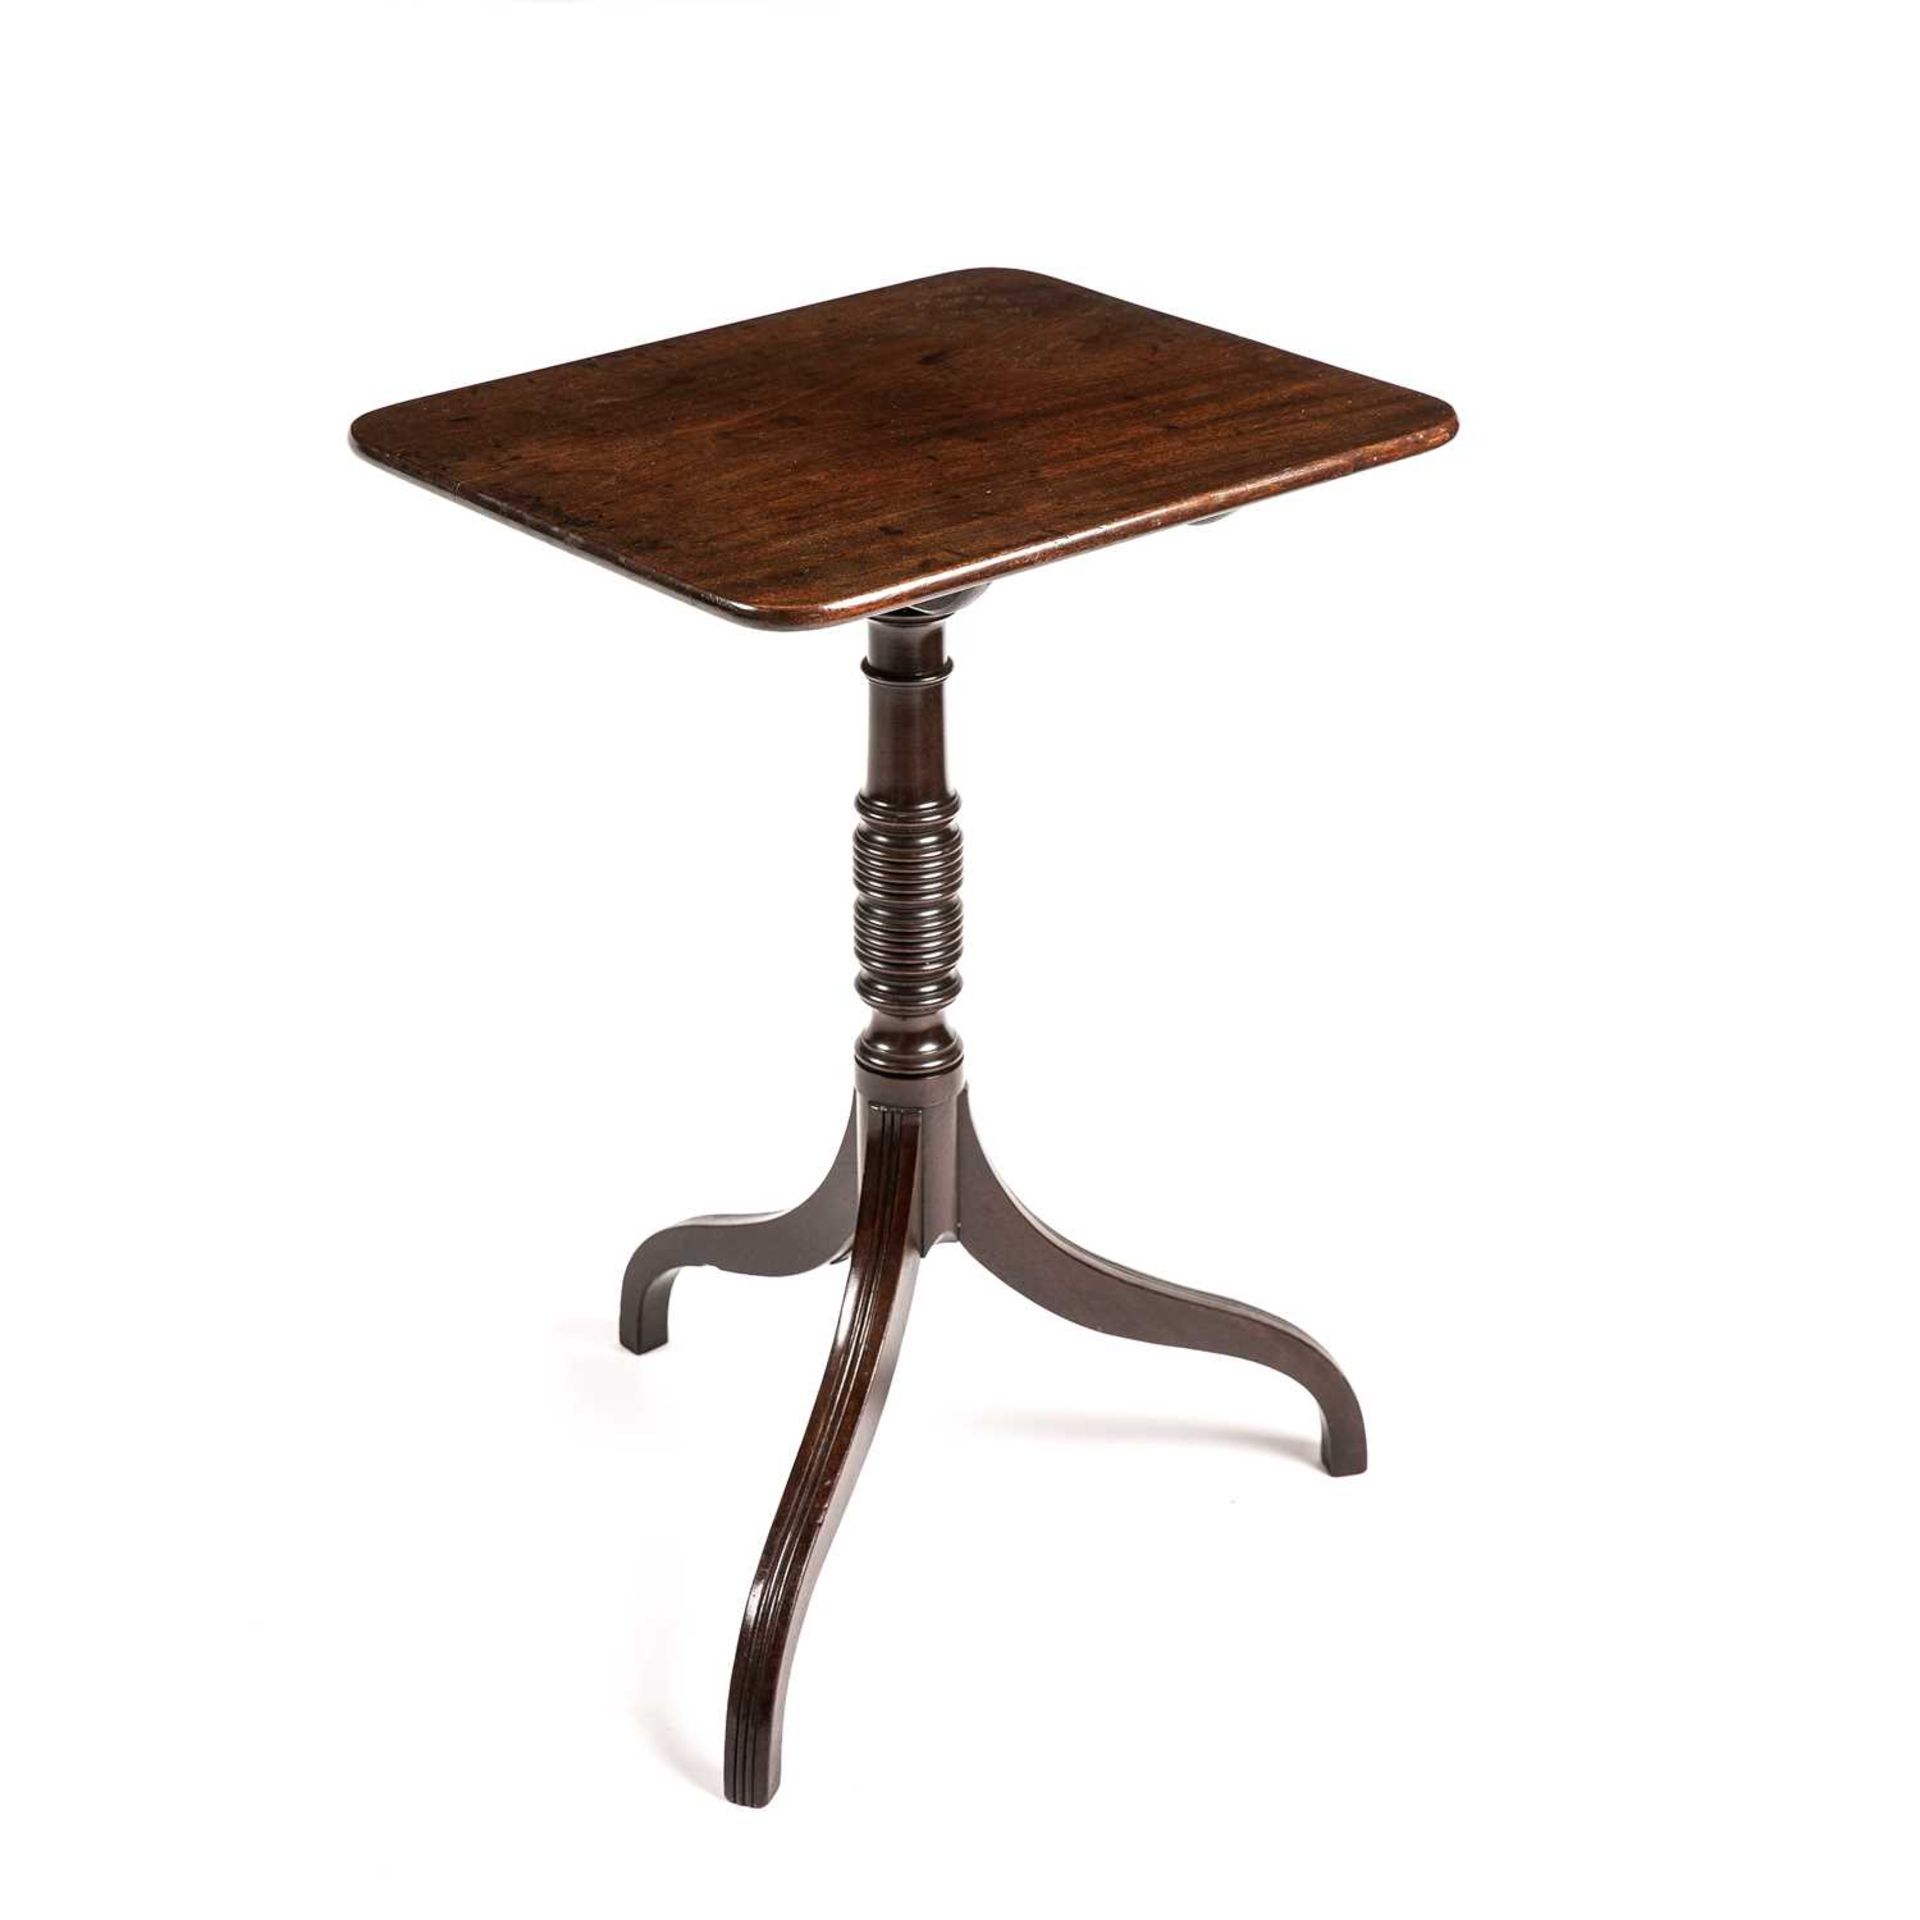 A Regency mahogany tilt top wine table with a turned stem and tripod base. 49cm wide 44cm deep